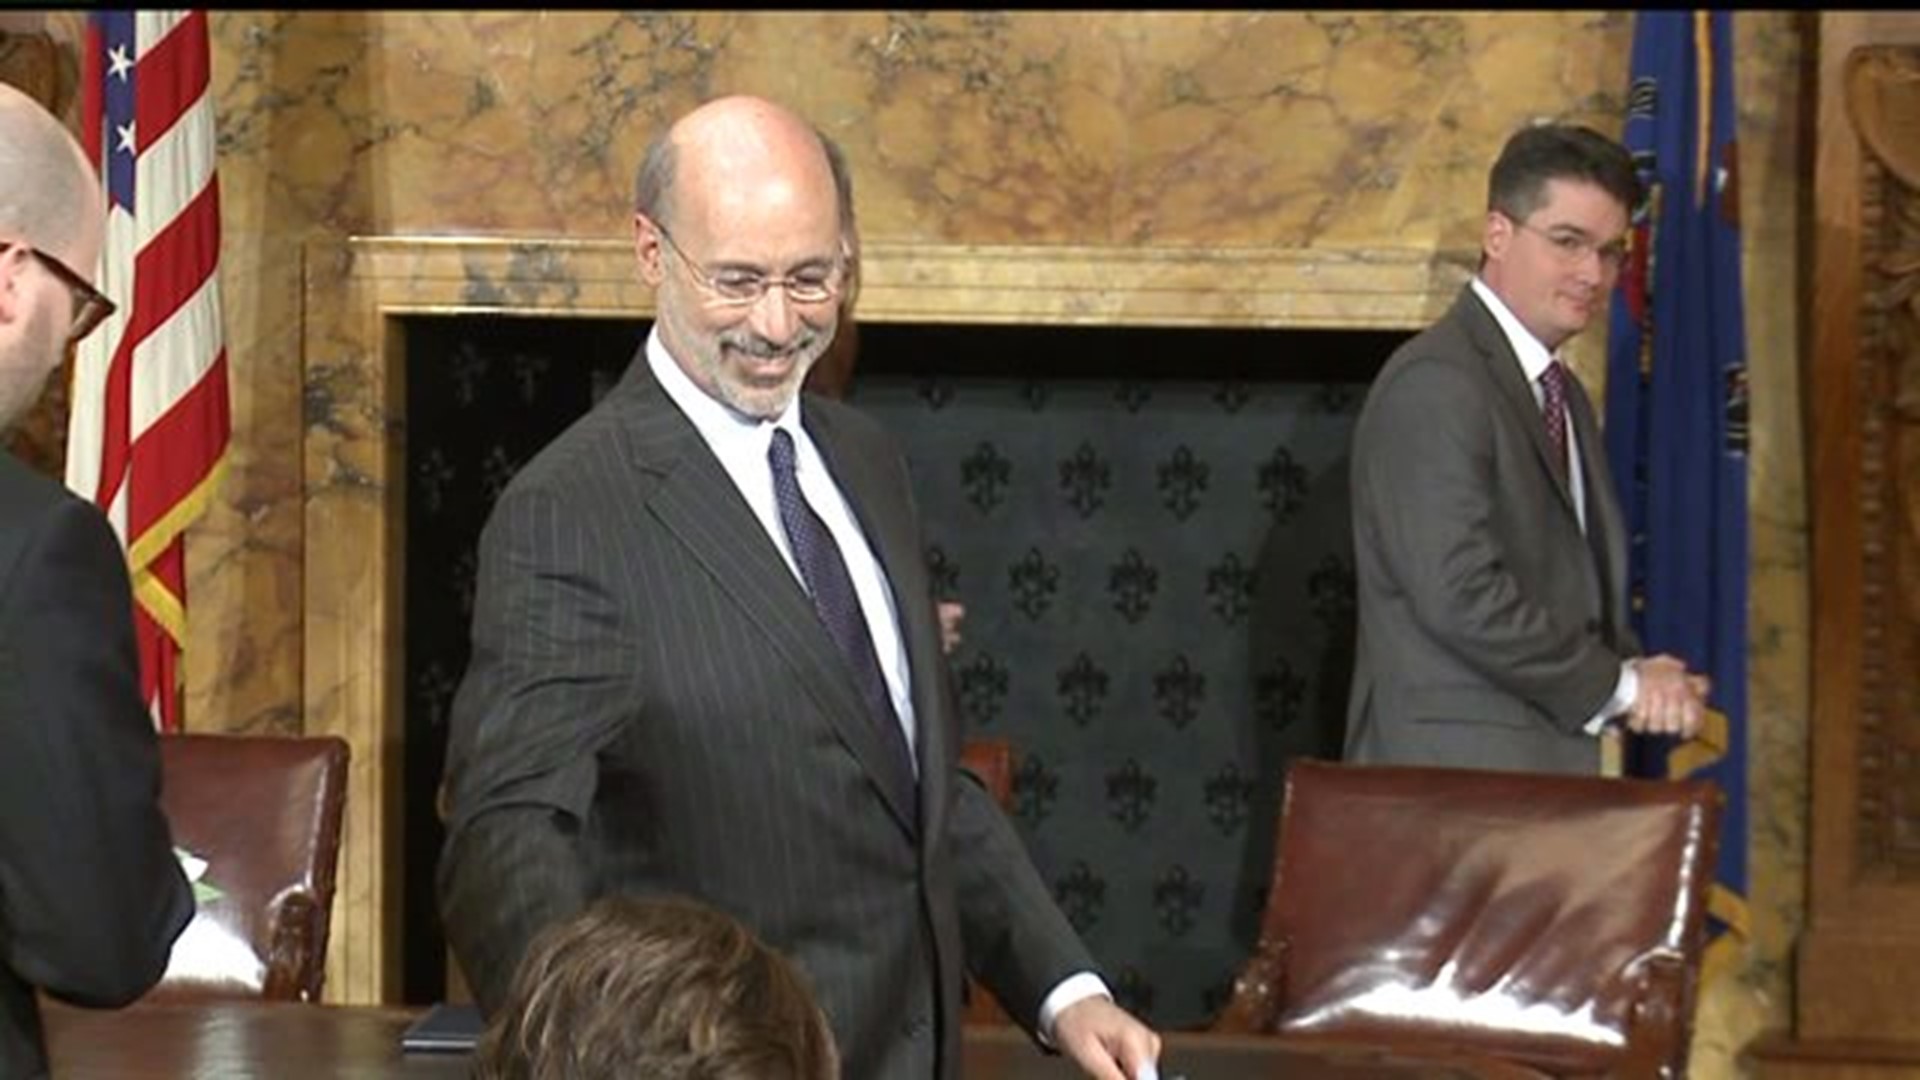 Governor Tom Wolf Announces Medicaid Expansion